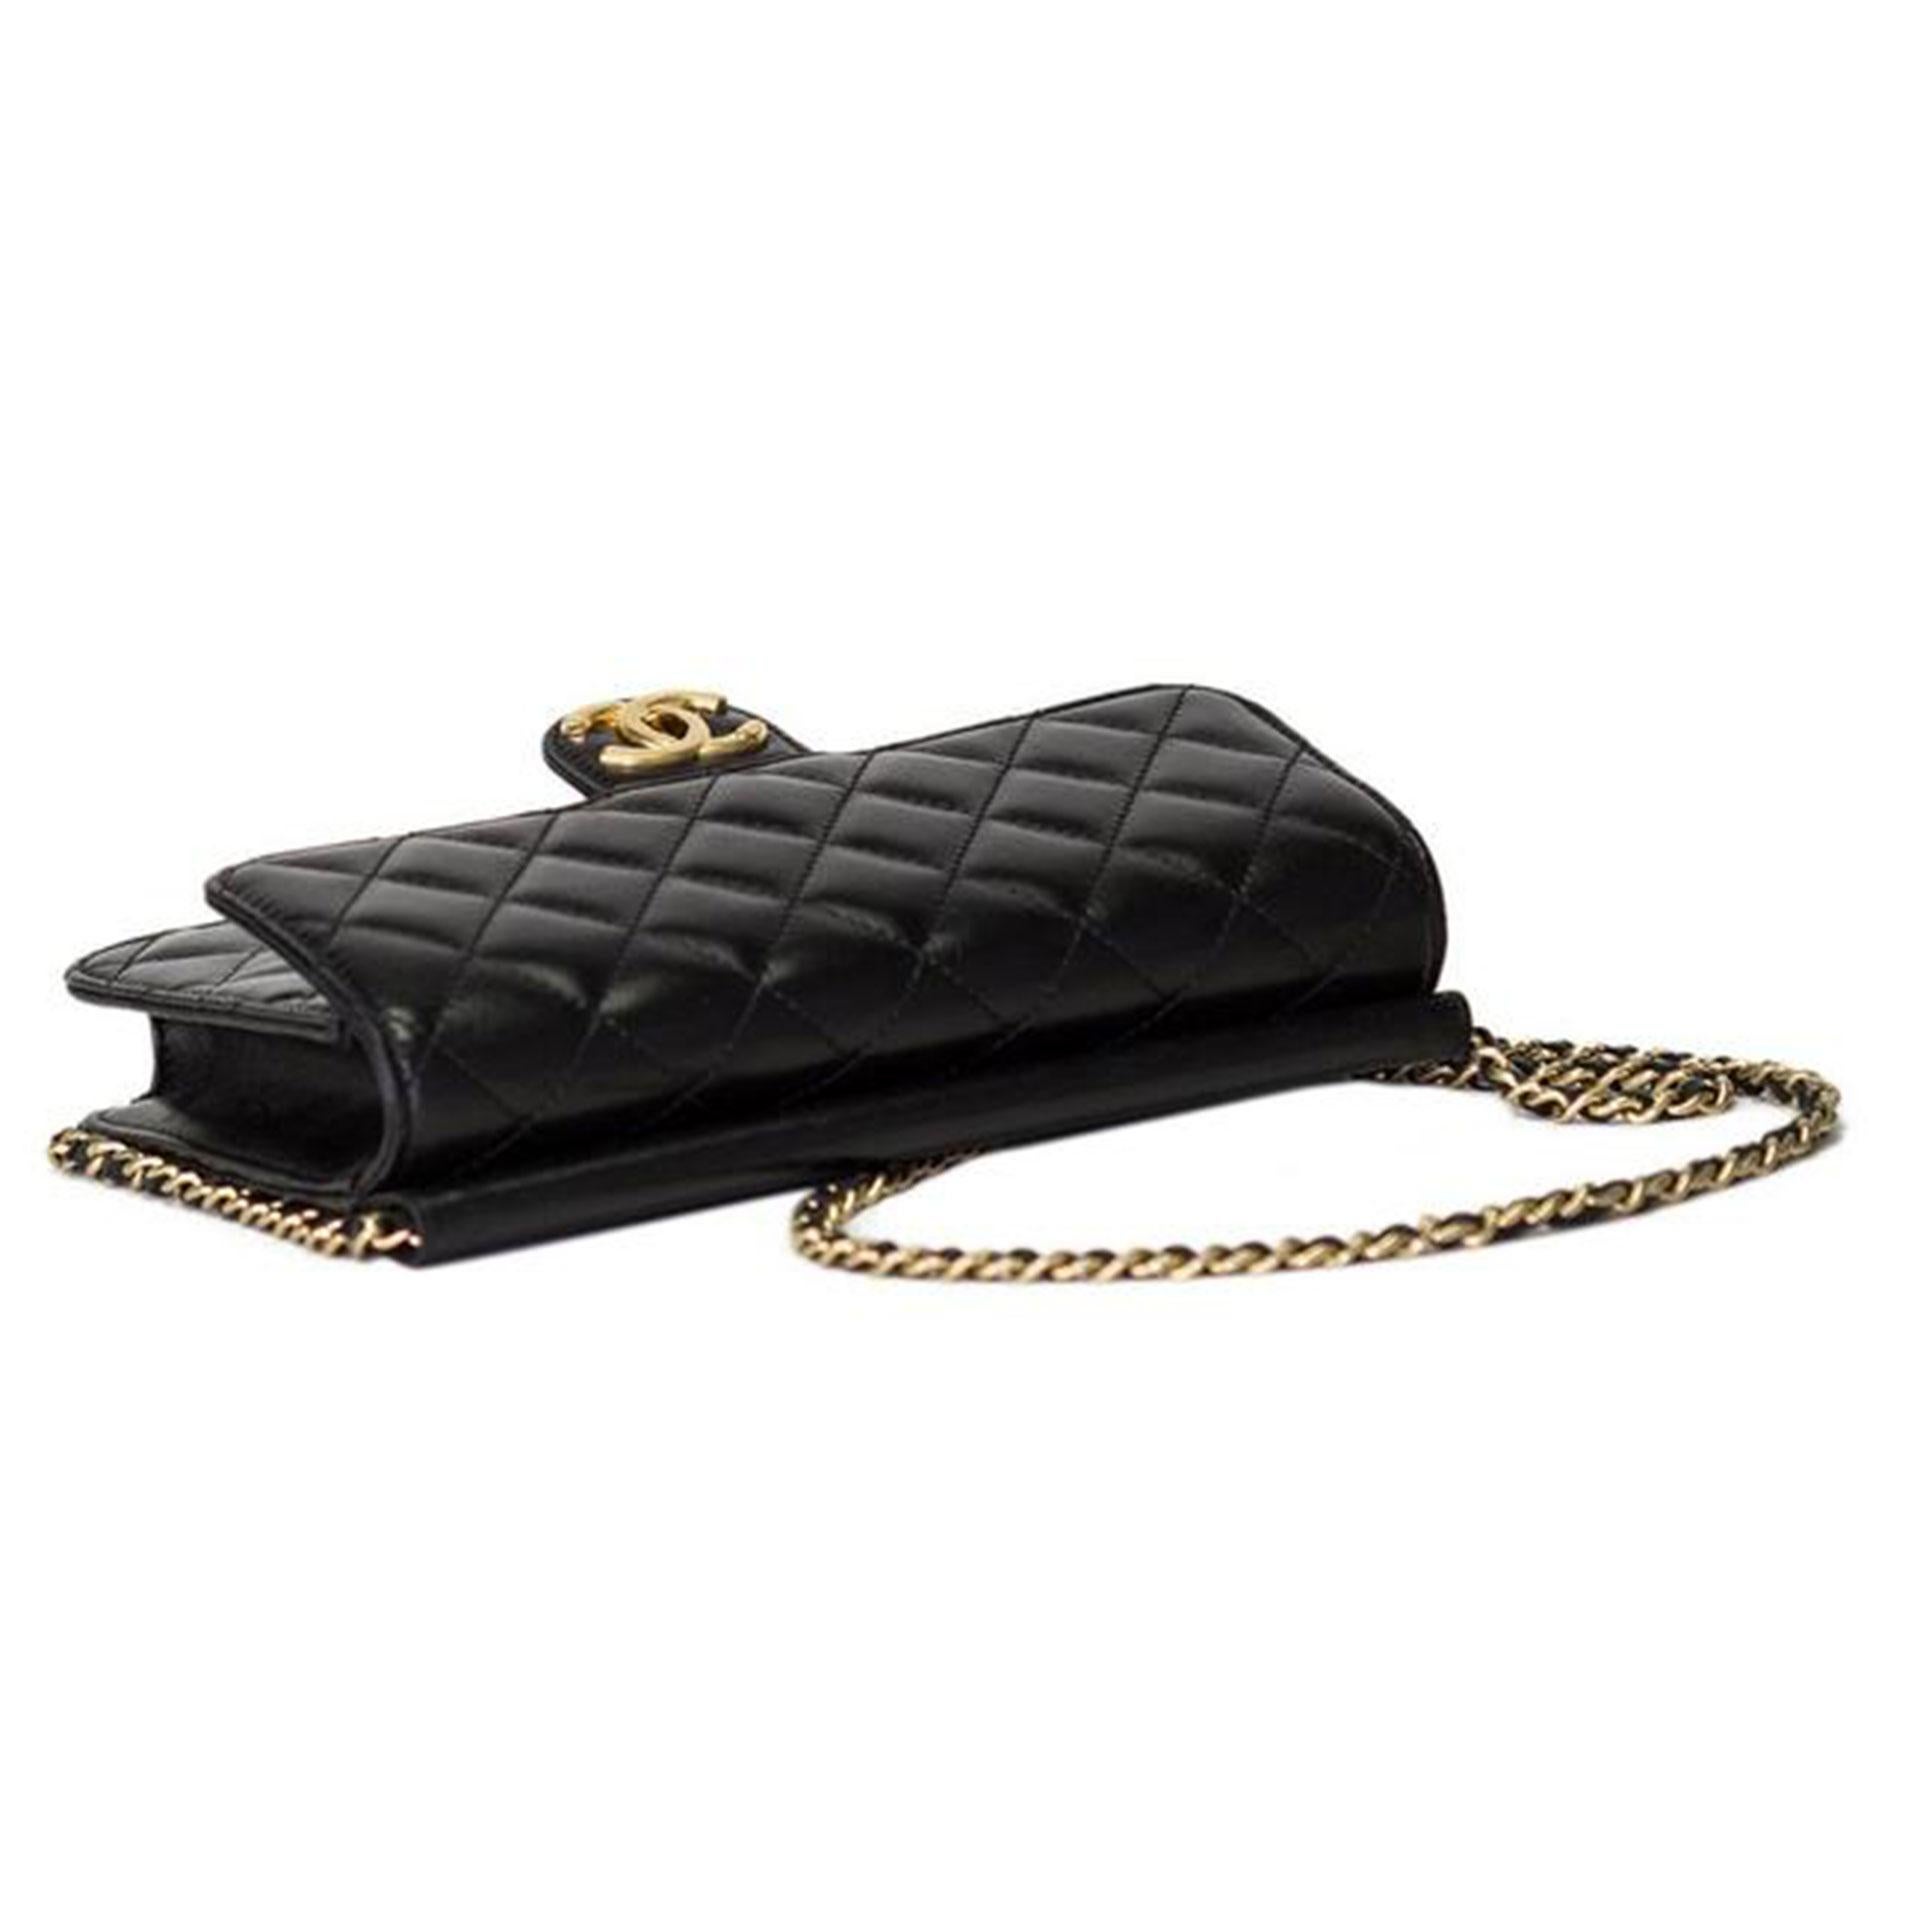 Chanel black lambskin quilted flap

Year: 2013
Antique gold hardware
CC turnlock closure
Classic interwoven chain
Lambskin Burgundy interior lining
Interior rear open back pocket
Interior single card slot
Classic back pocket
5